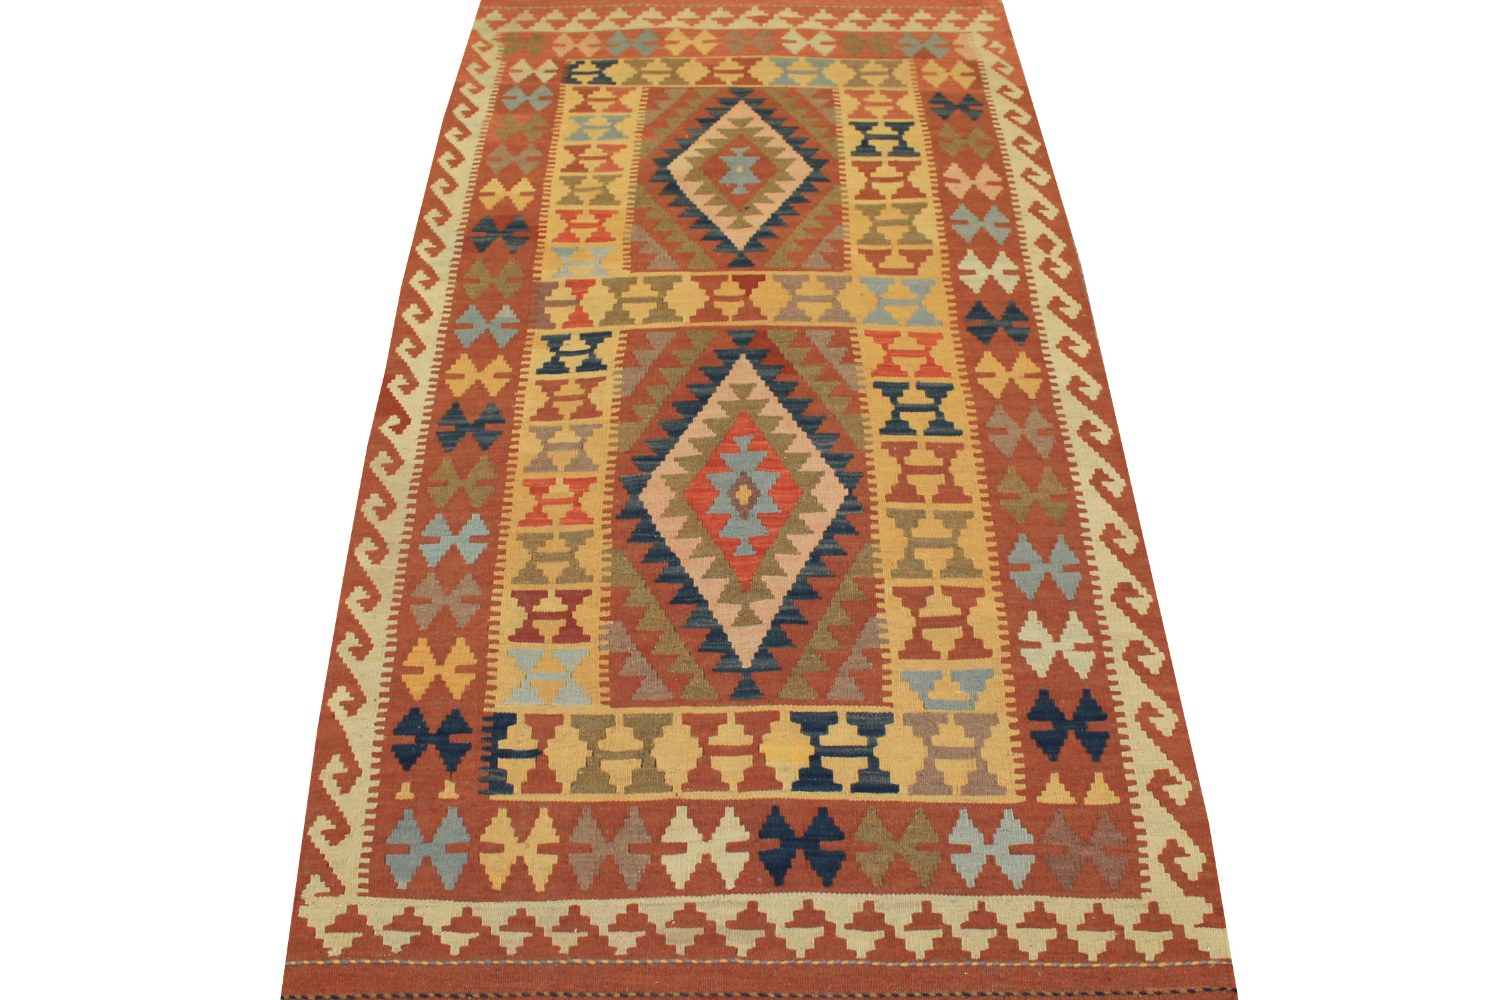 4x6 Flat Weave Hand Knotted Wool Area Rug - MR13329